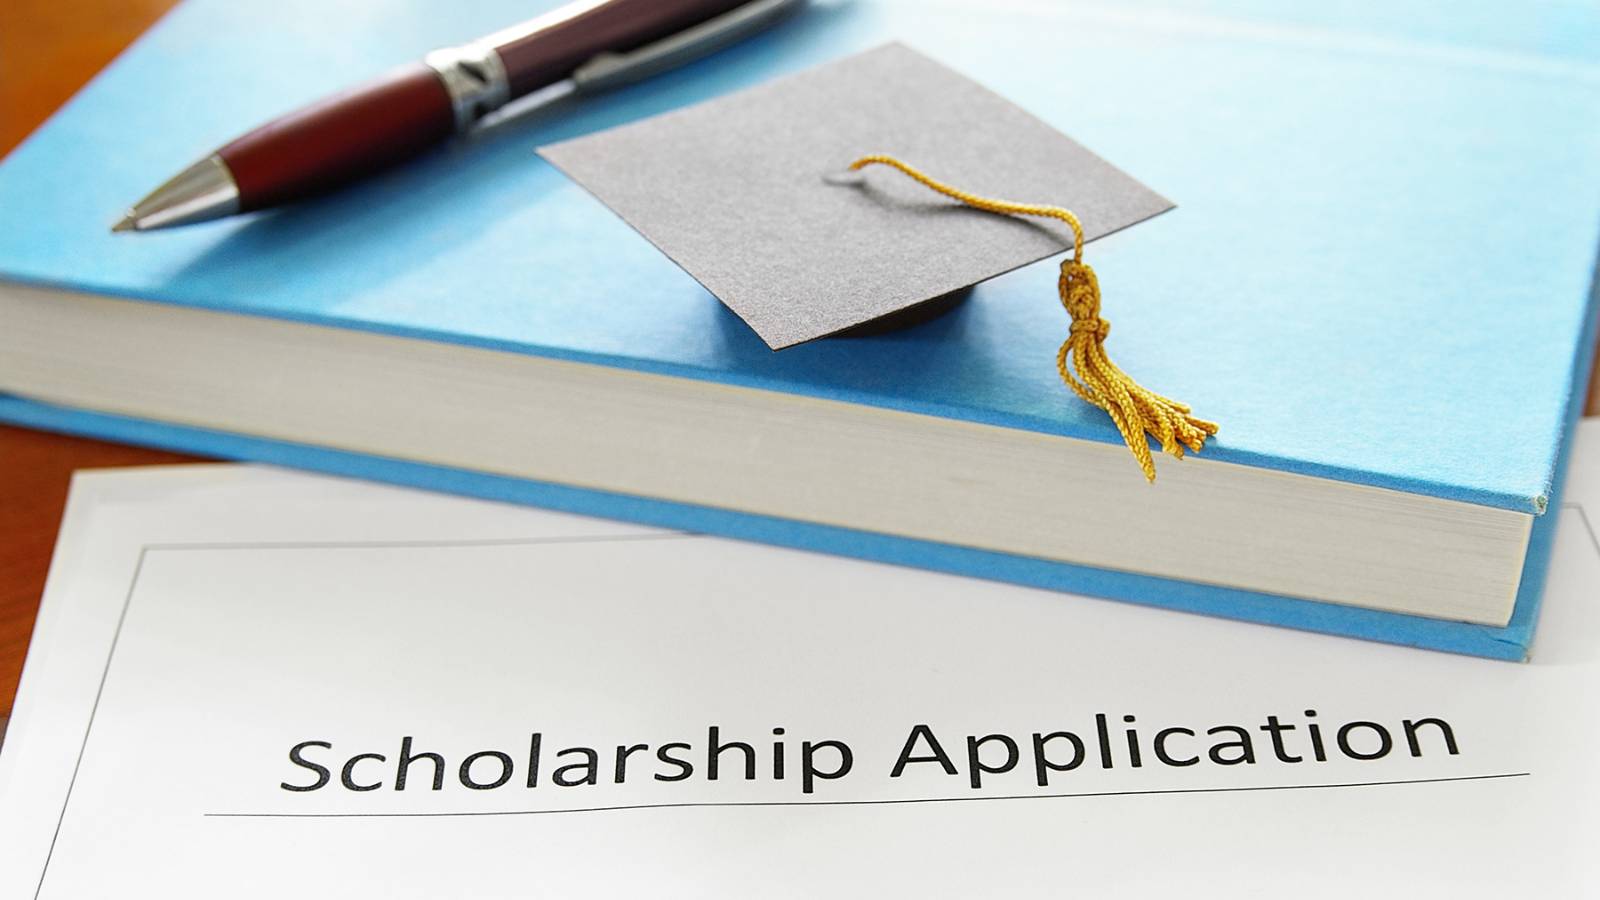 Paper scholarship application, with a book and miniture graduation cap on top